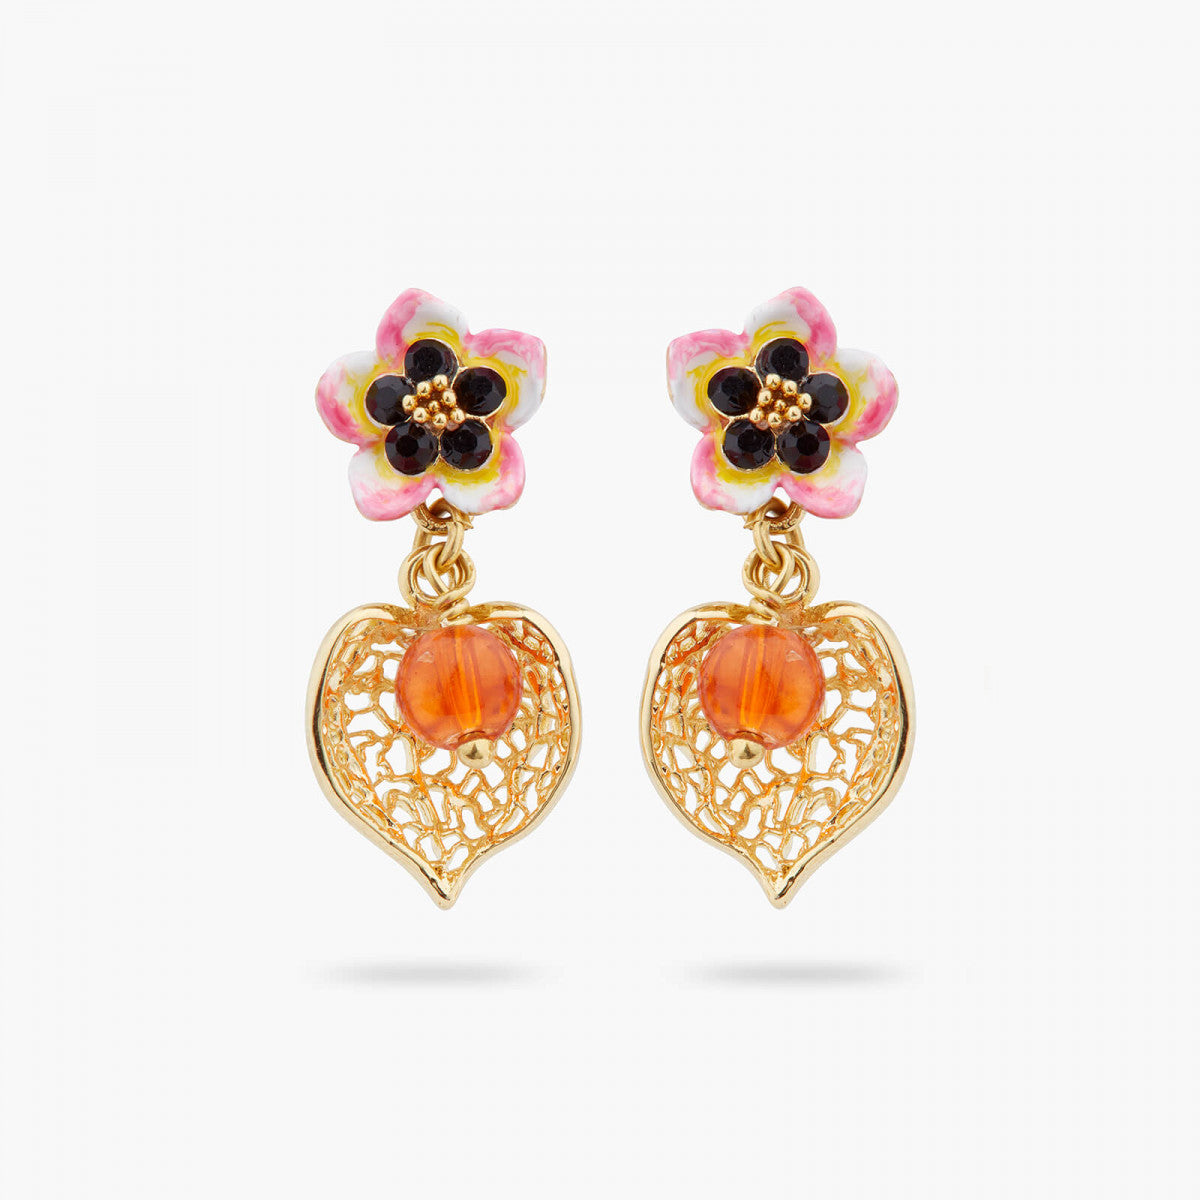 TIARÉ FLOWER AND PHYSALIS POST EARRINGS